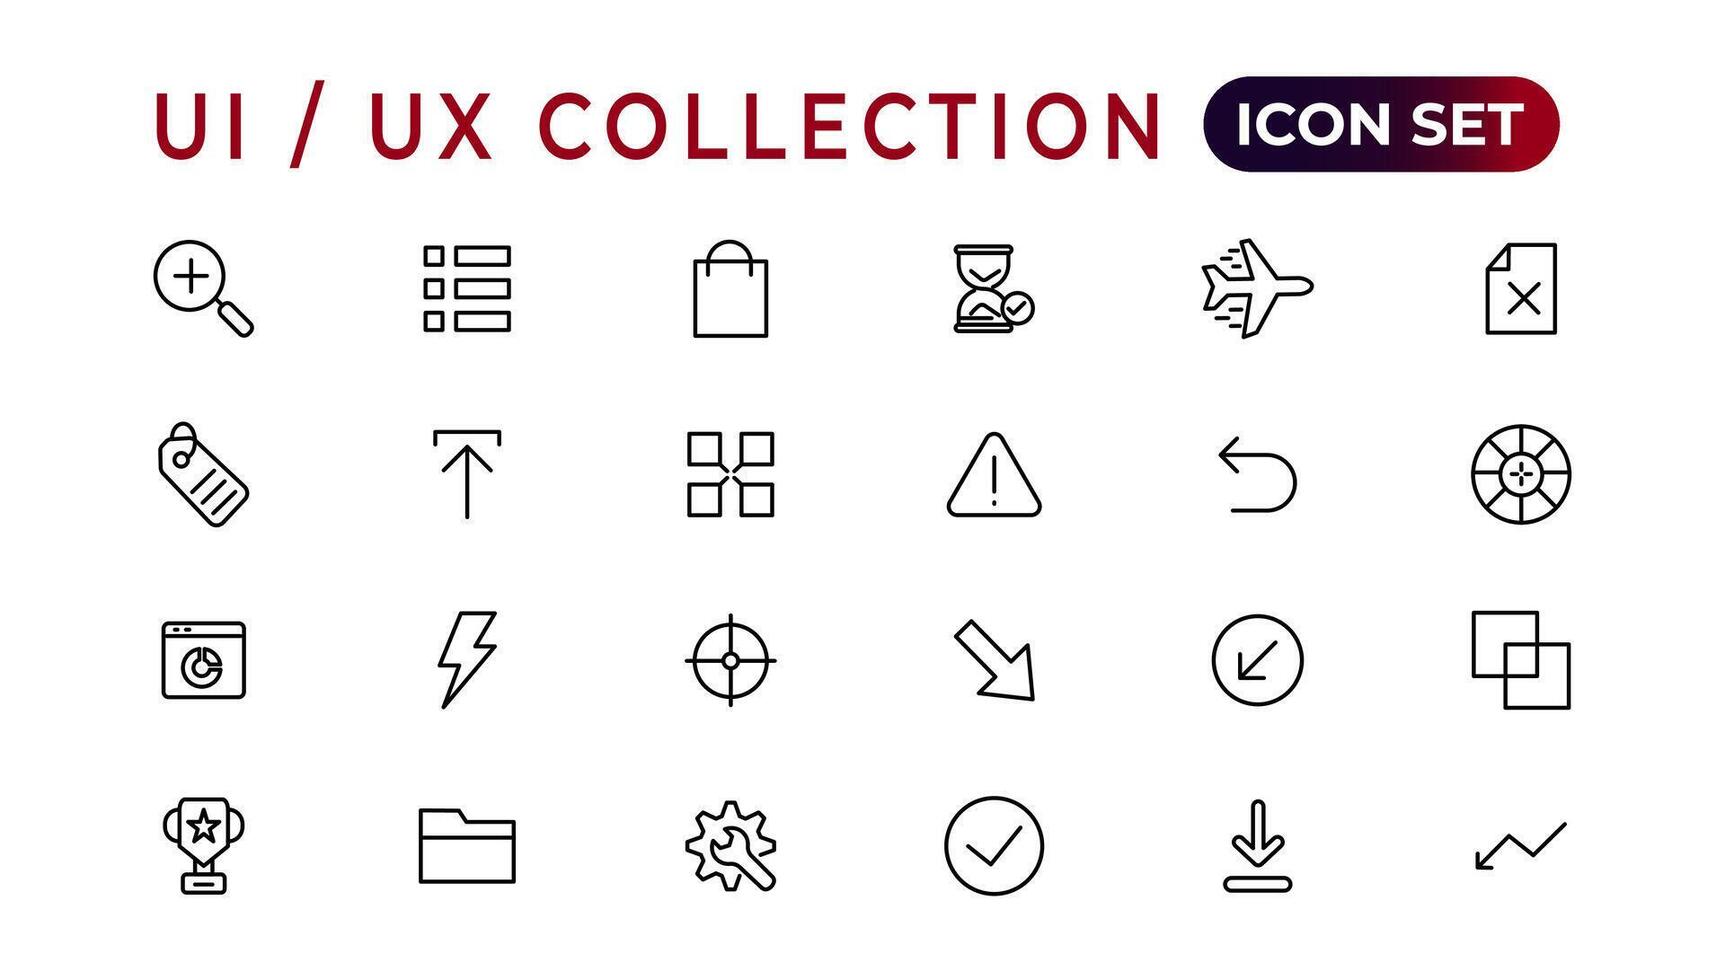 Mega set of ui ux icon set, user interface iconset collection.Set of thin line web icon set, simple outline icons collection, Pixel Perfect icons, Simple vector illustration.